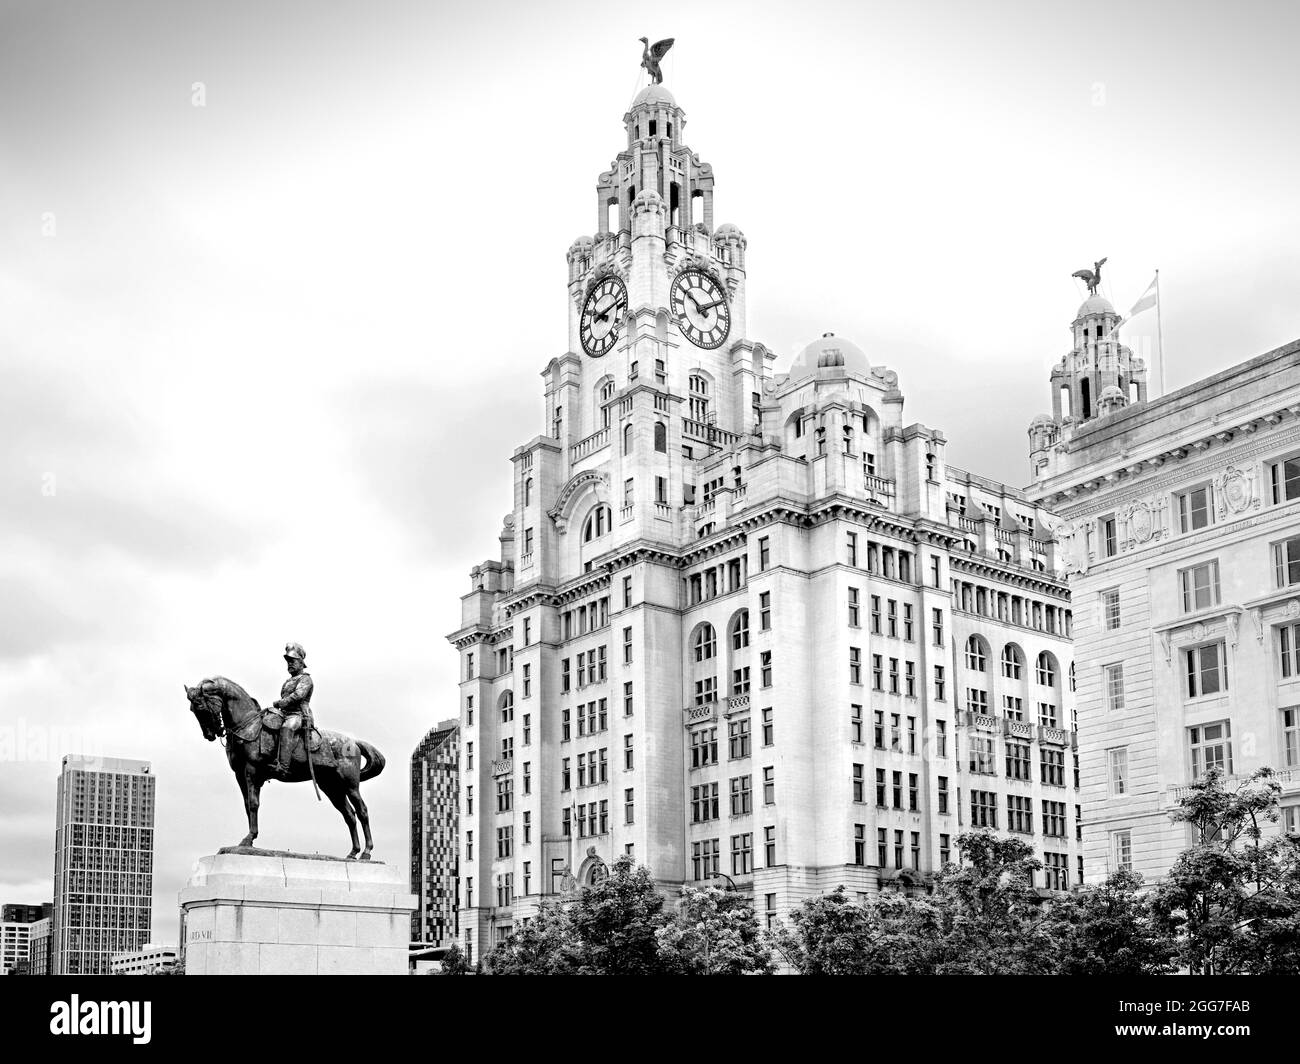 The Royal Liver building a grade II building at the Pier Head Liverpool a UNESCO world heritage site with the statue of Edward VII on horseback Stock Photo